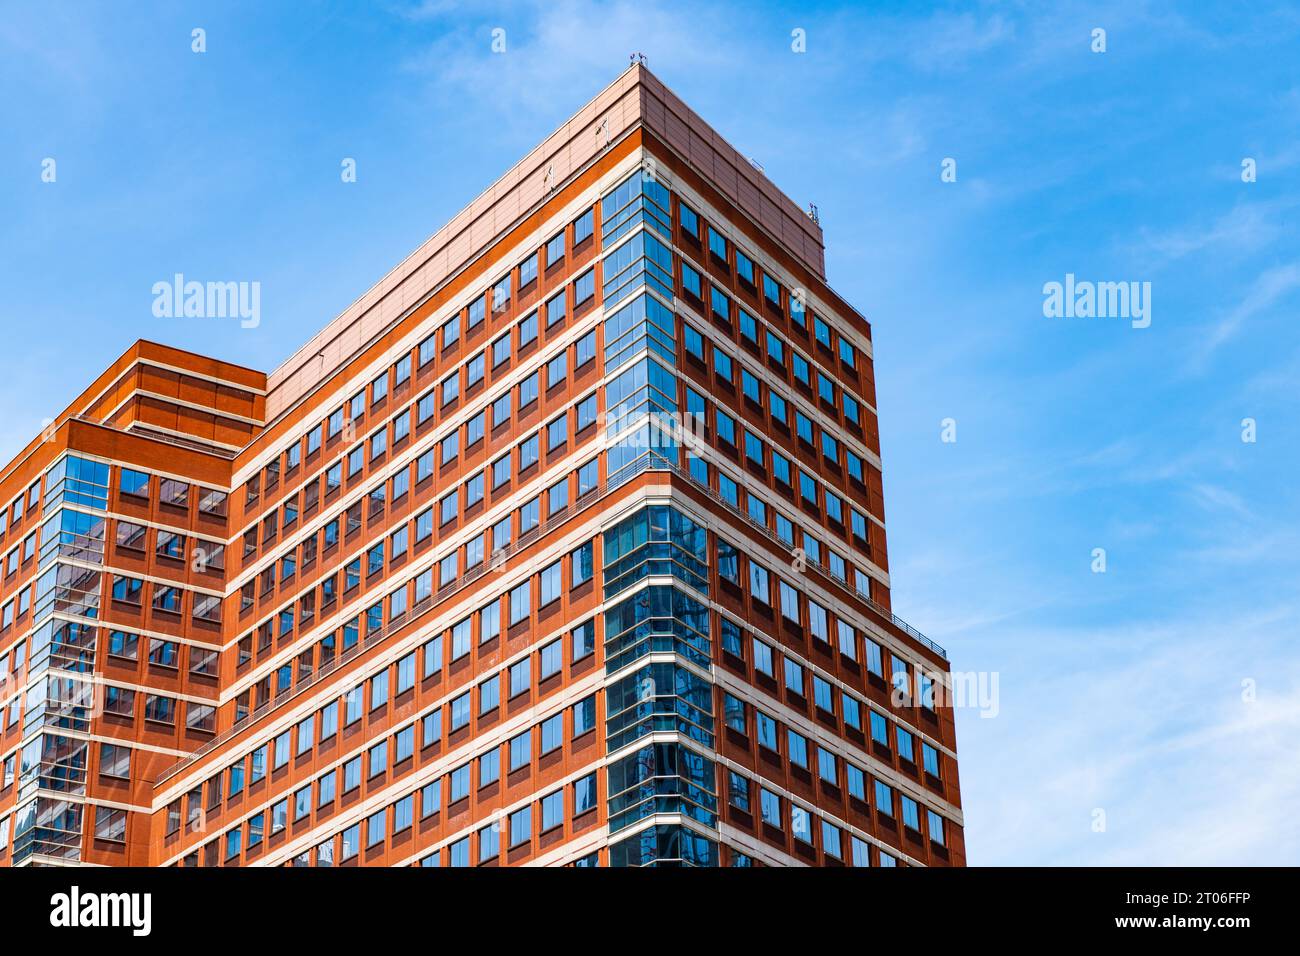 city downtown with skyscraper. office building exterior. skyscraper building architecture. skyscraper with facade. modern city building. skyscraper in Stock Photo